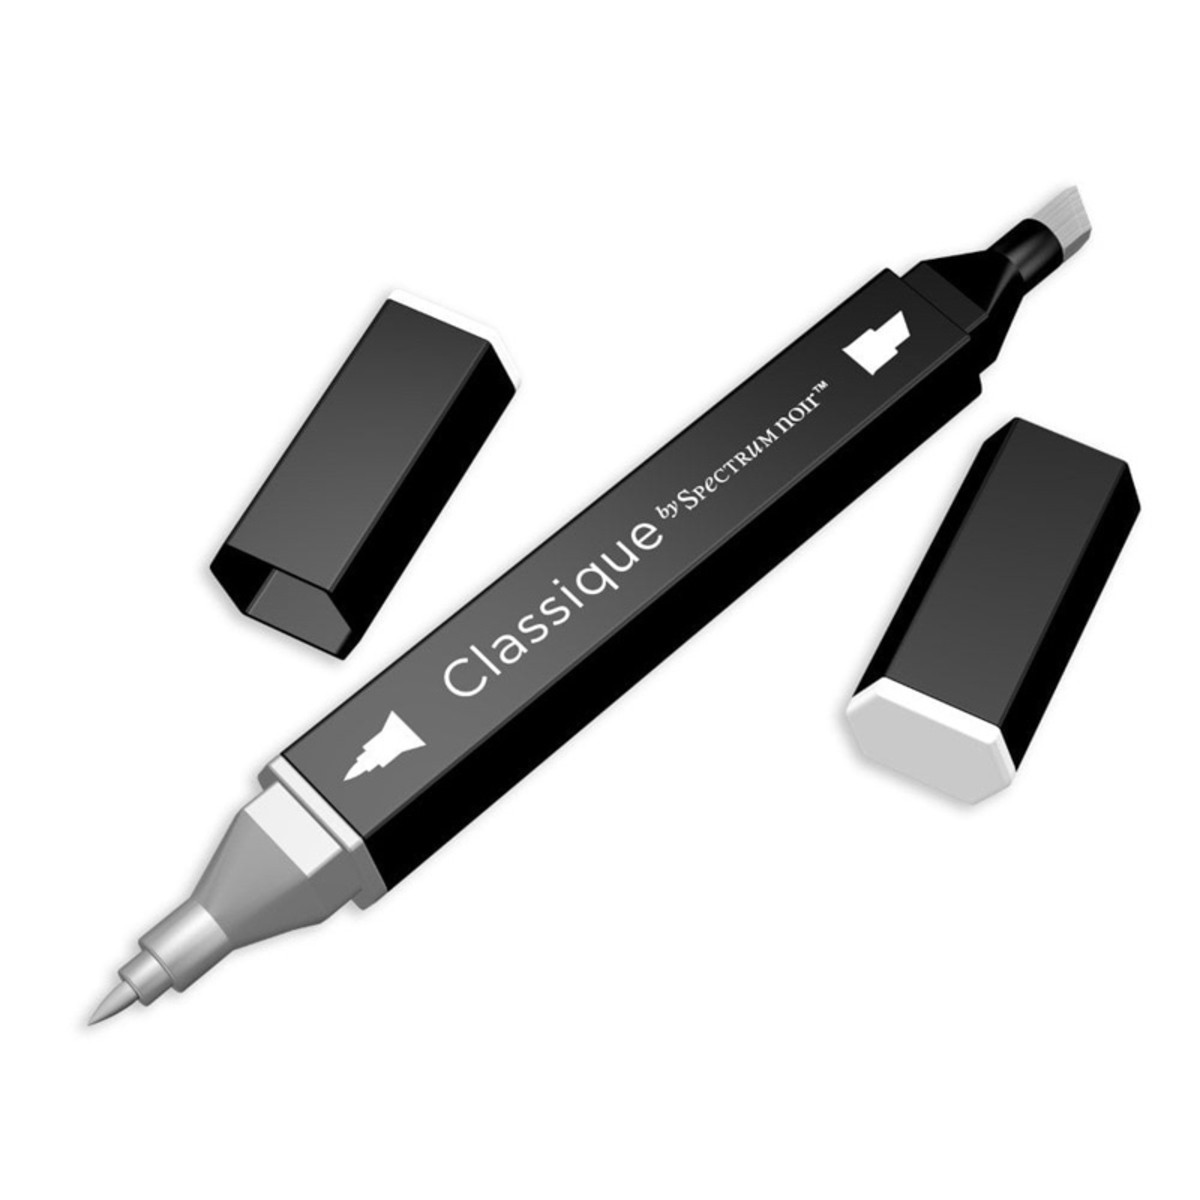 The blender pen actually helps you "erase" any marker ink where you do not want it